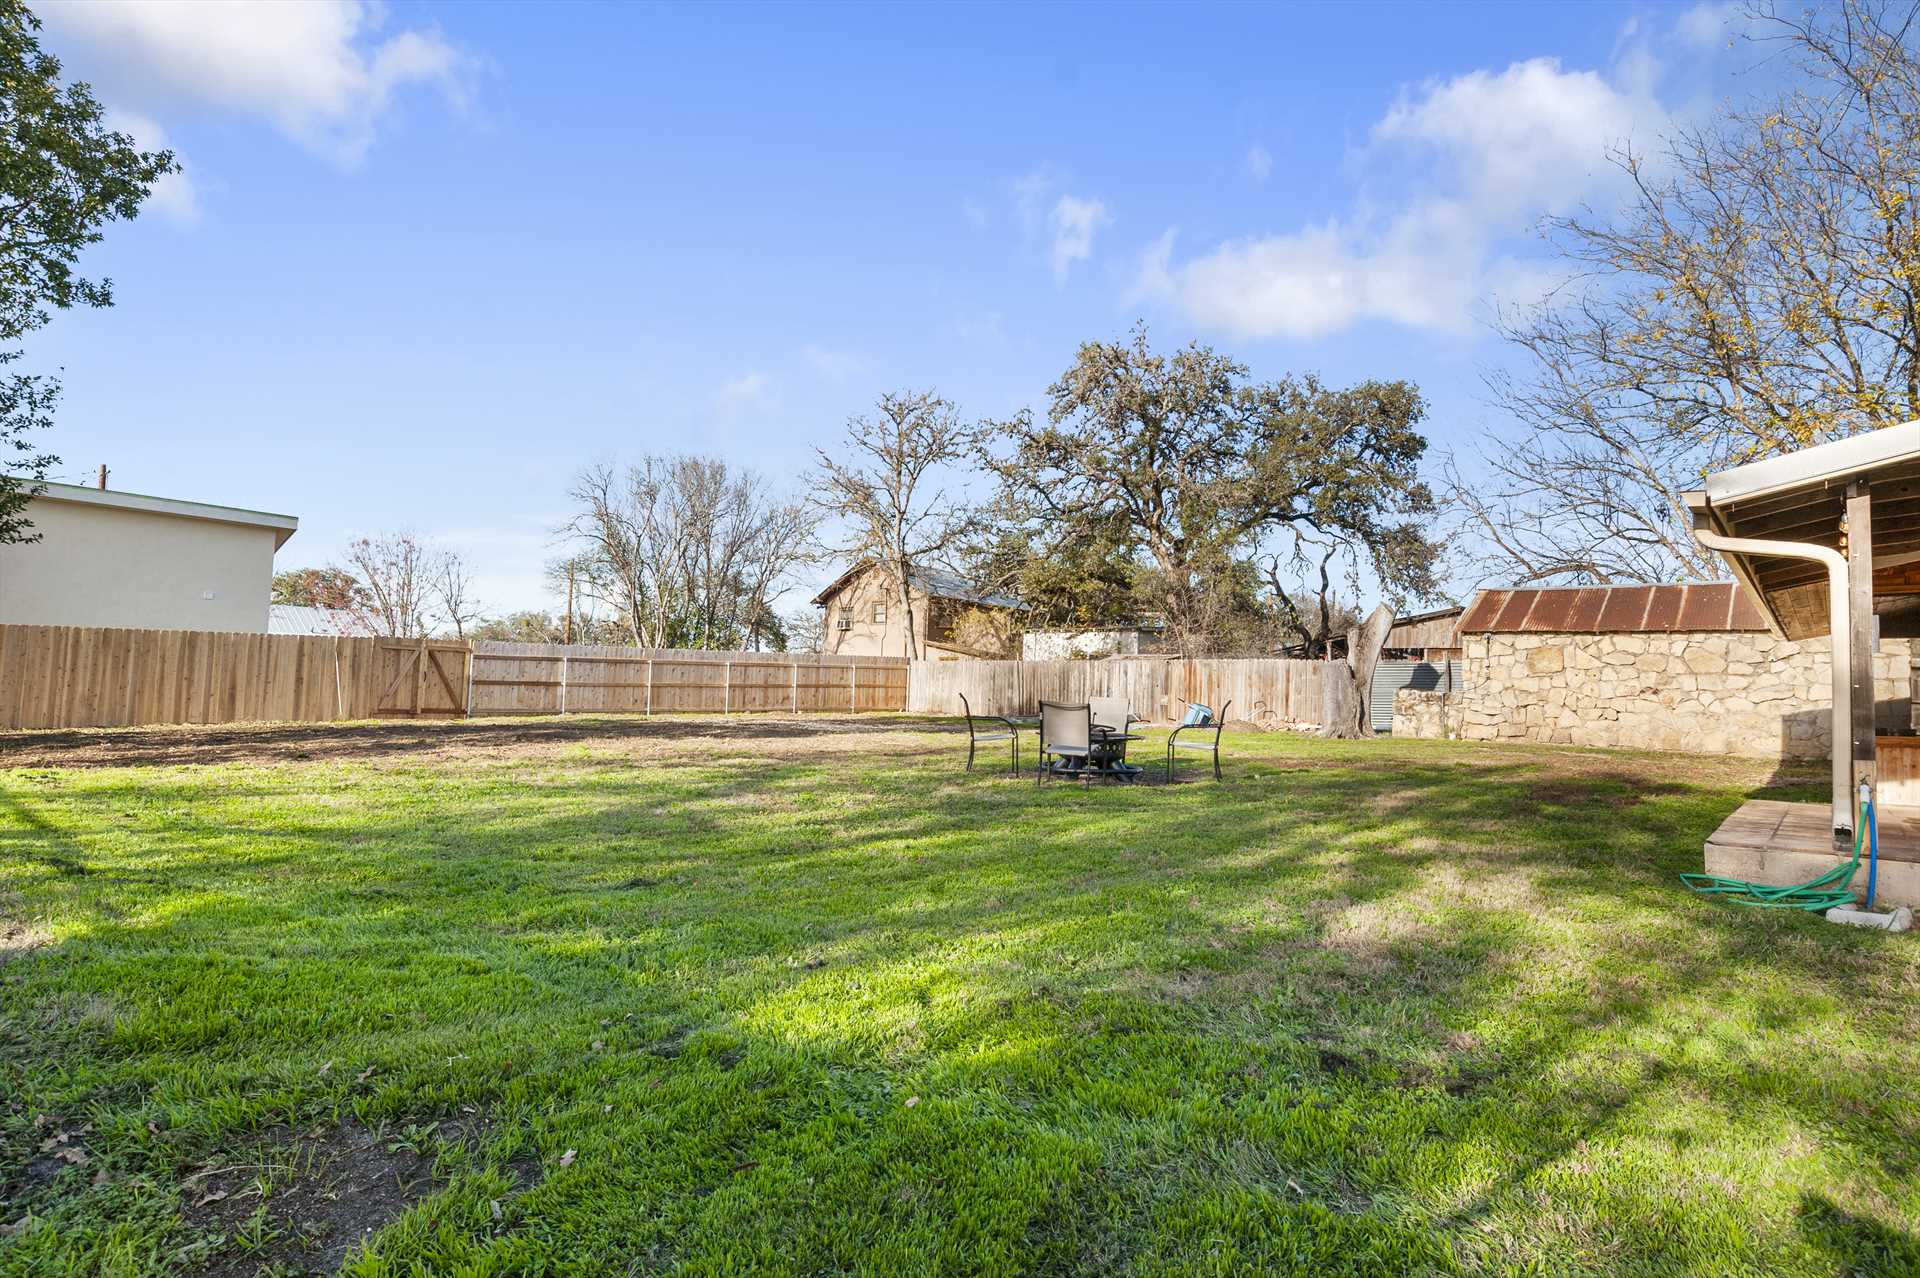                                                 There's plenty of room in the massive backyard, one of the highlights that makes A Place on Pecan a kid-friendly space.